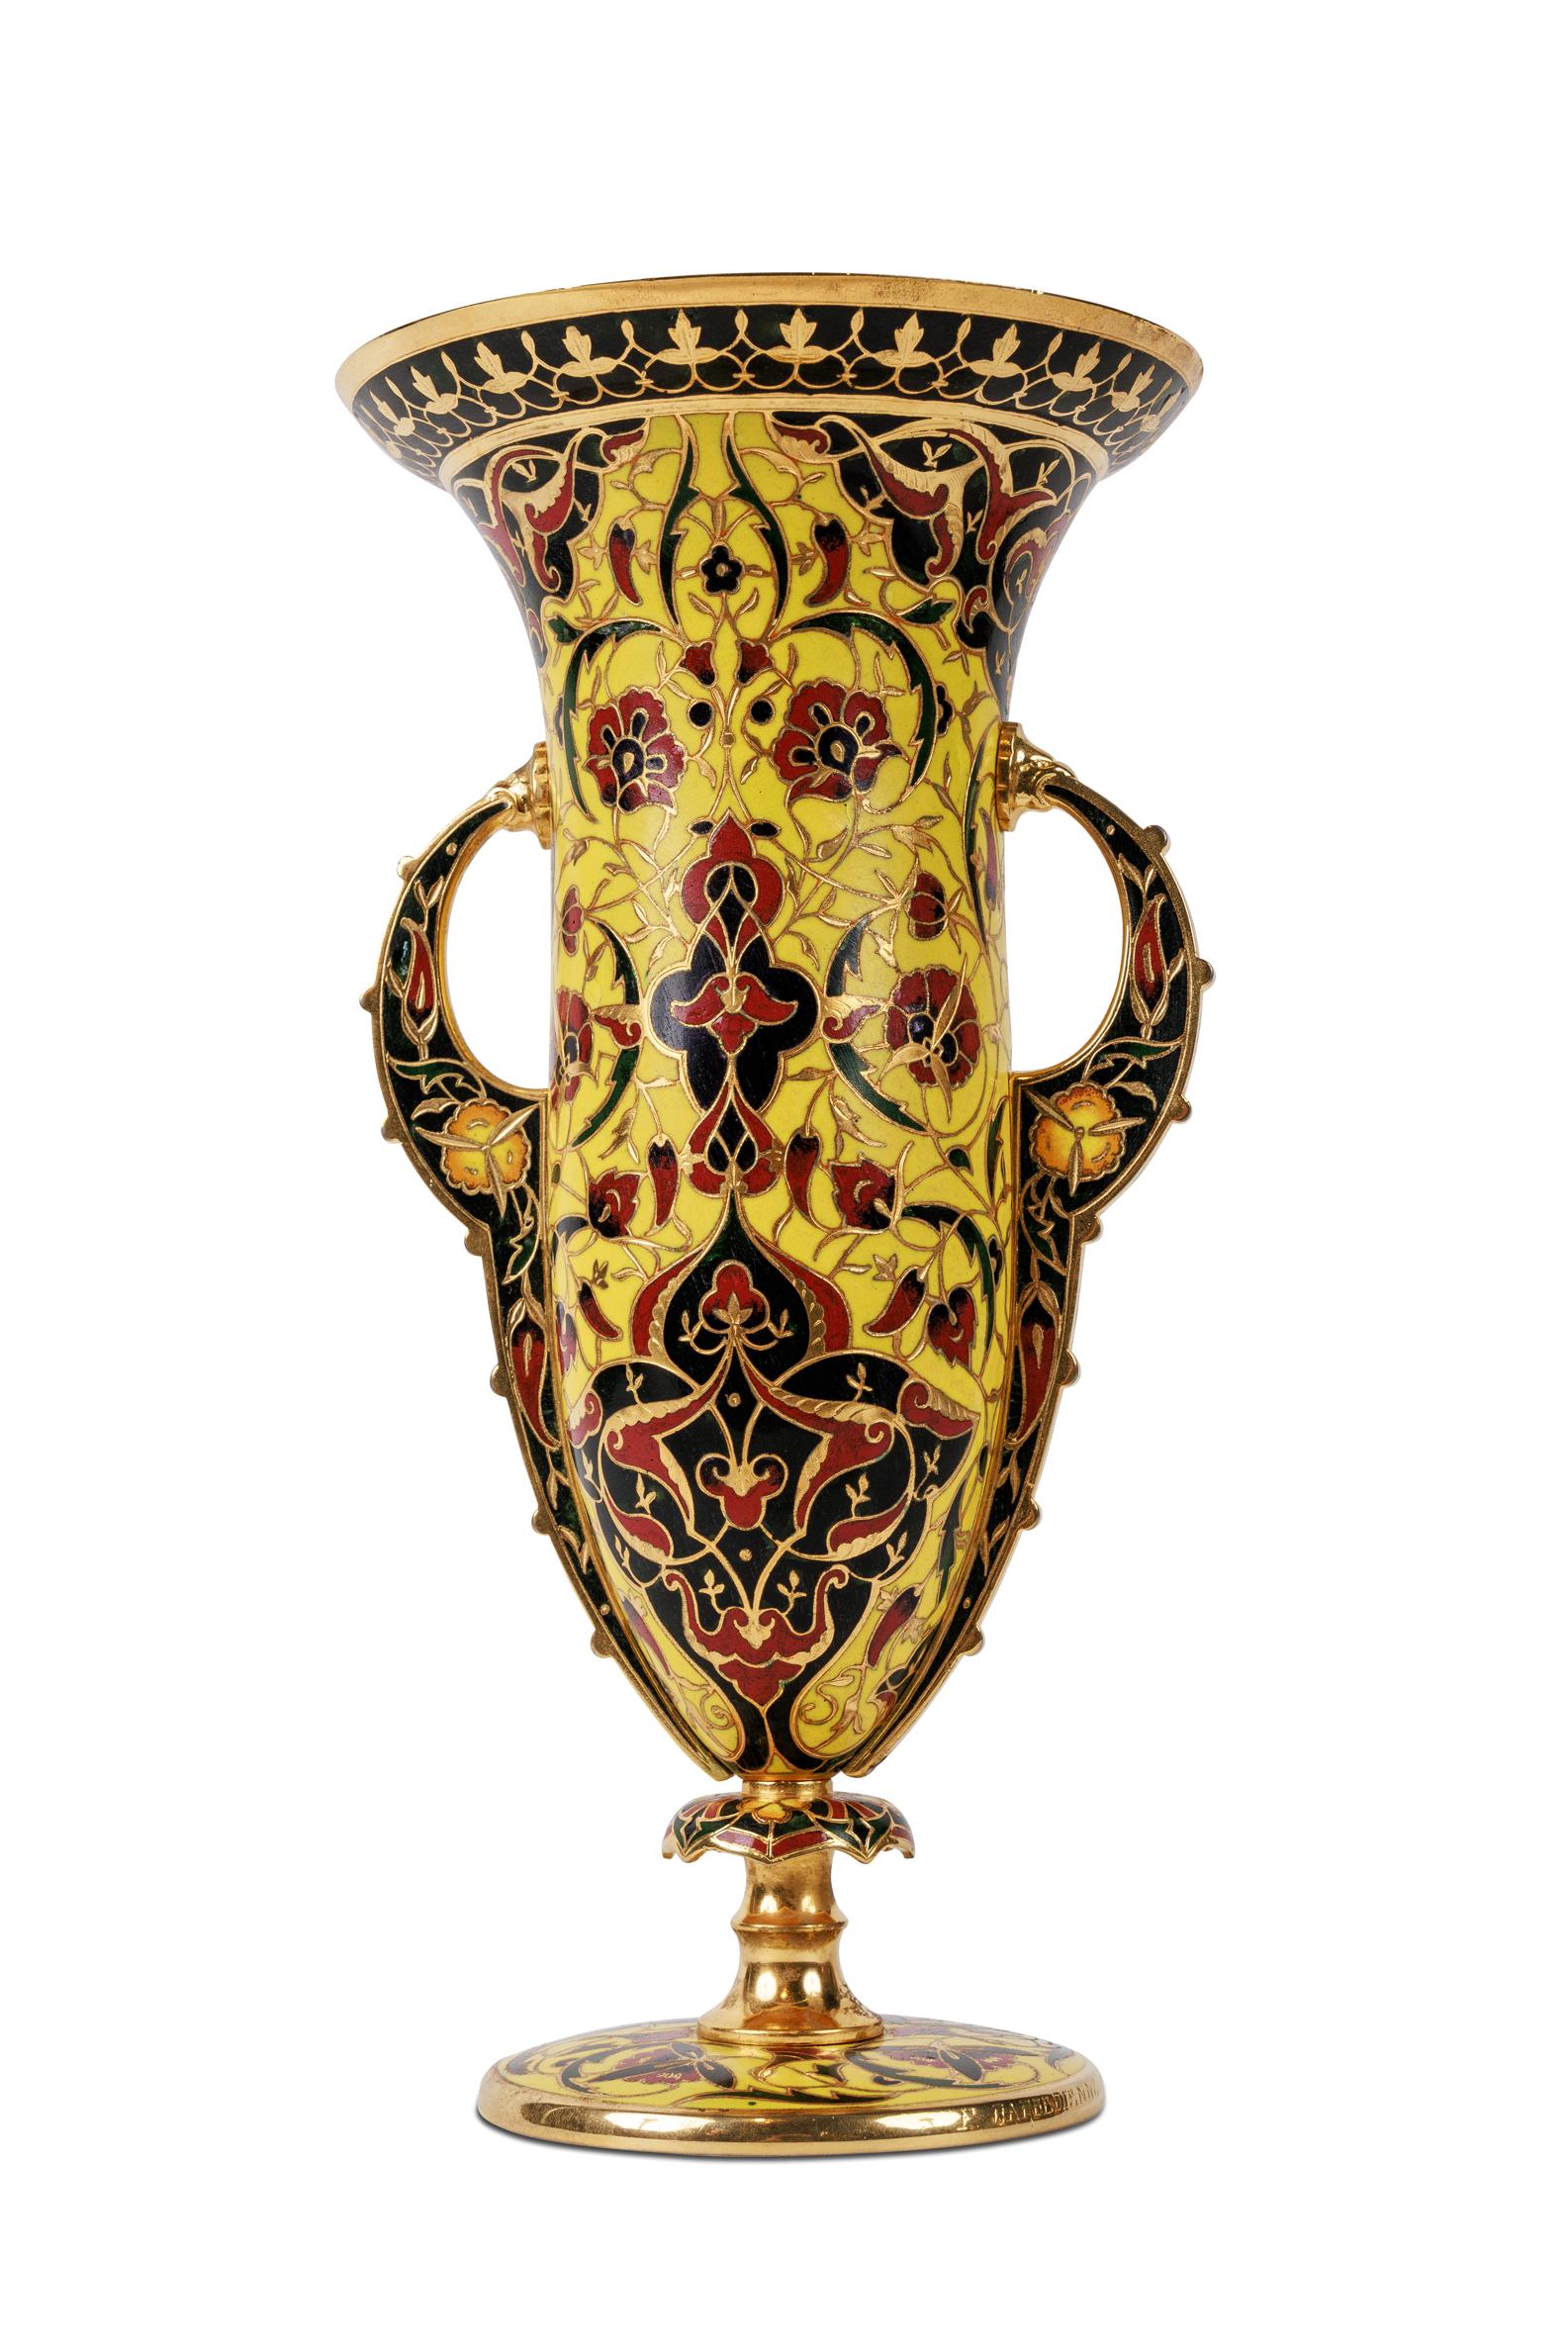 19th Century Ferdinand Barbedienne, A French Ormolu and Champleve Enamel Vase, C. 1870